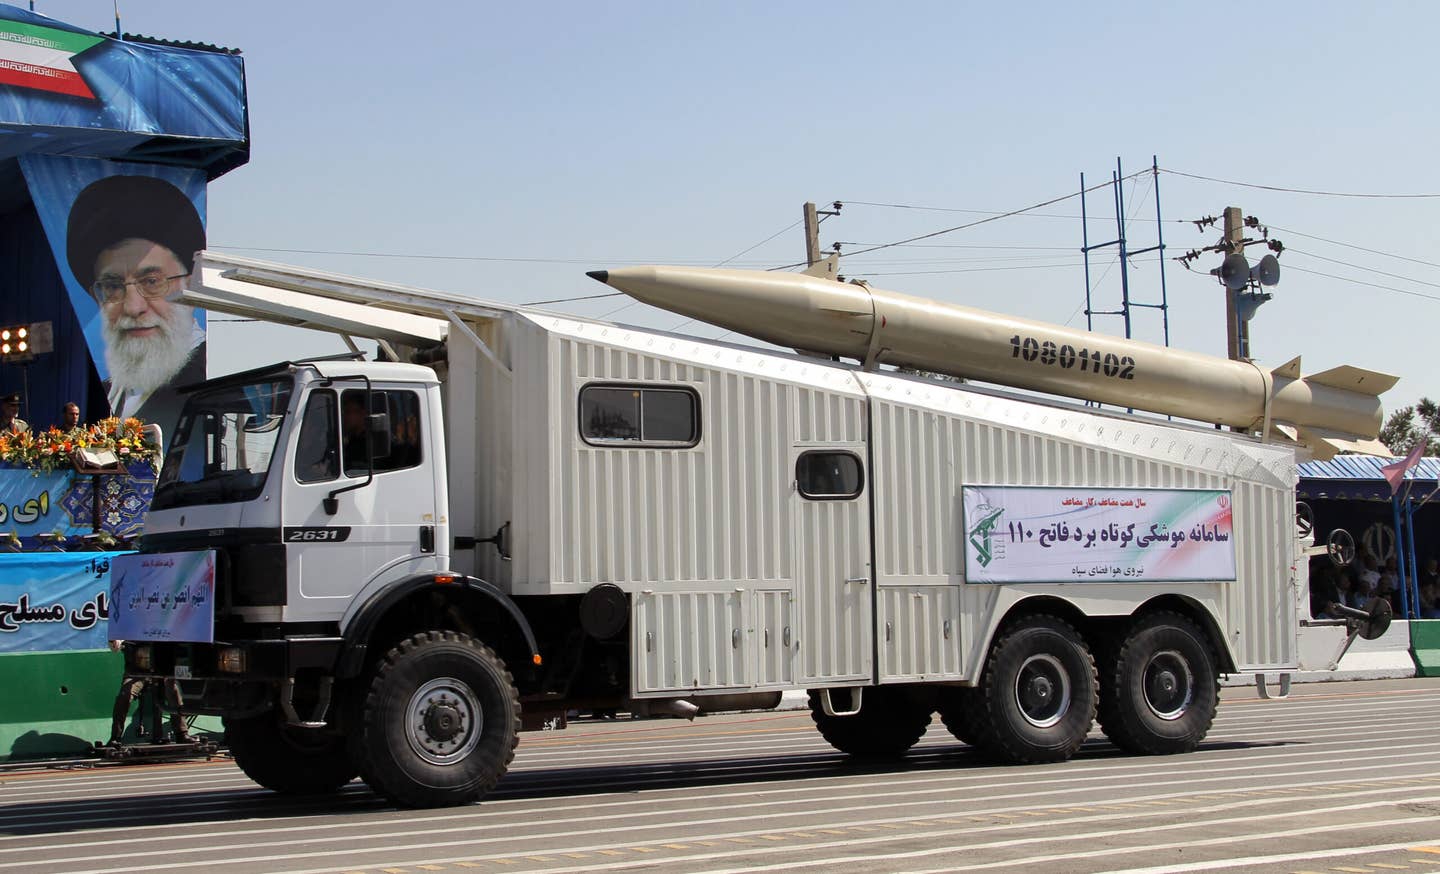 A military truck parades the Fateh-110 SRBM during a military parade in the Iranian capital Tehran on September 22, 2010. <em>ATTA KENARE/AFP via Getty Images</em>